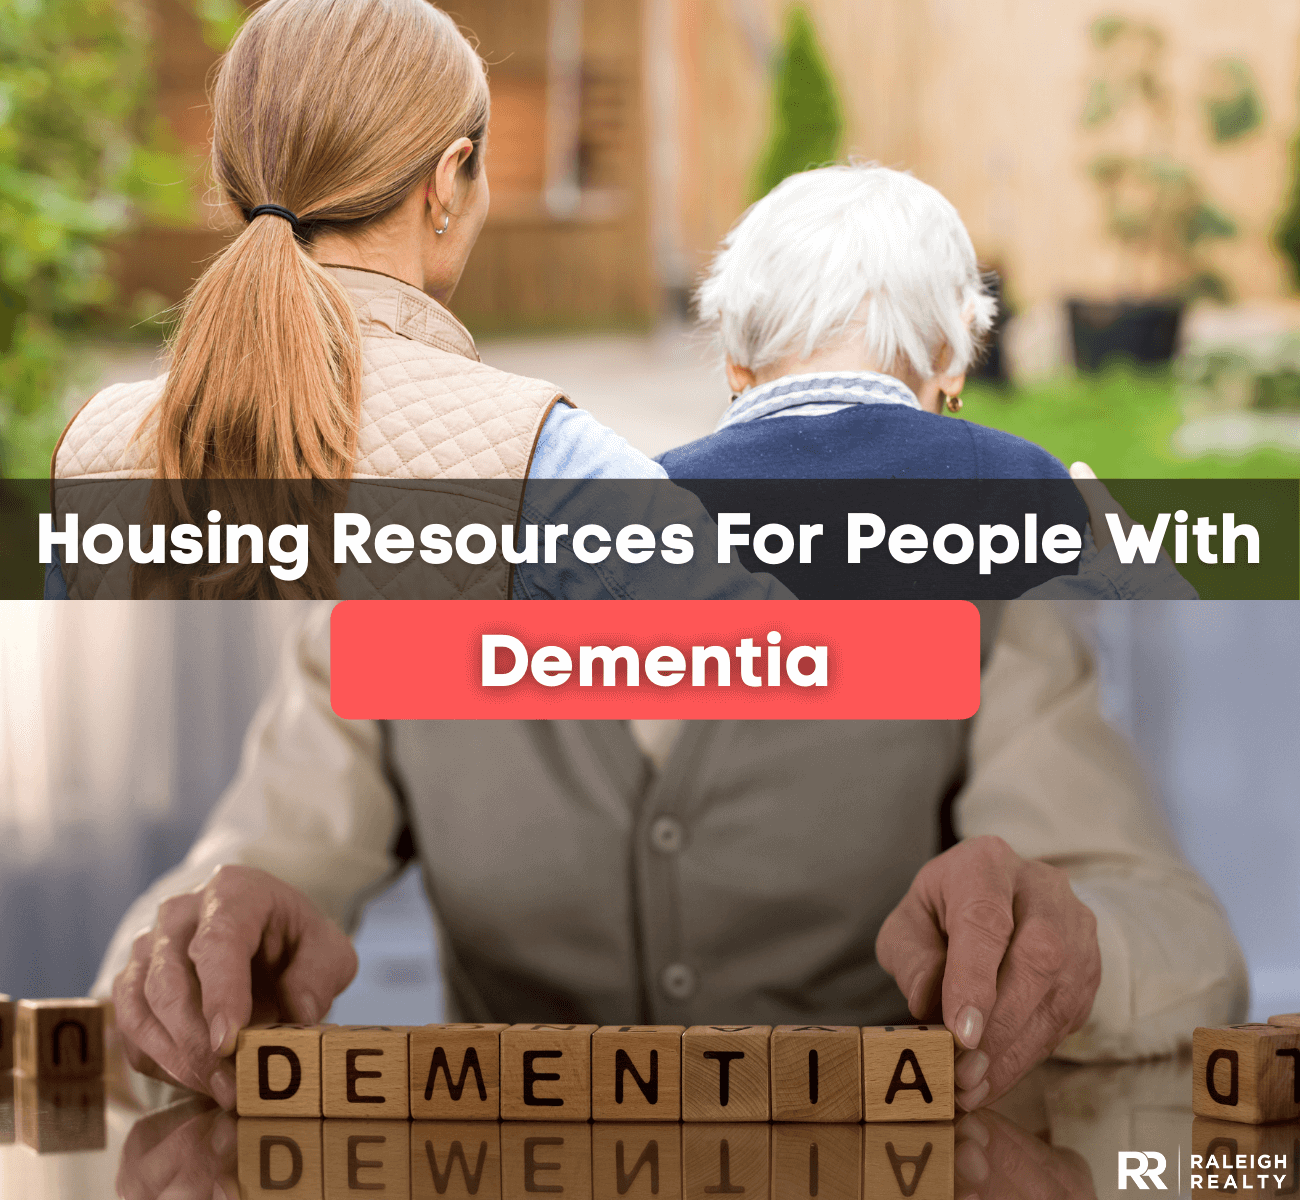 Housing Resources for People With Dementia or Alzheimer's